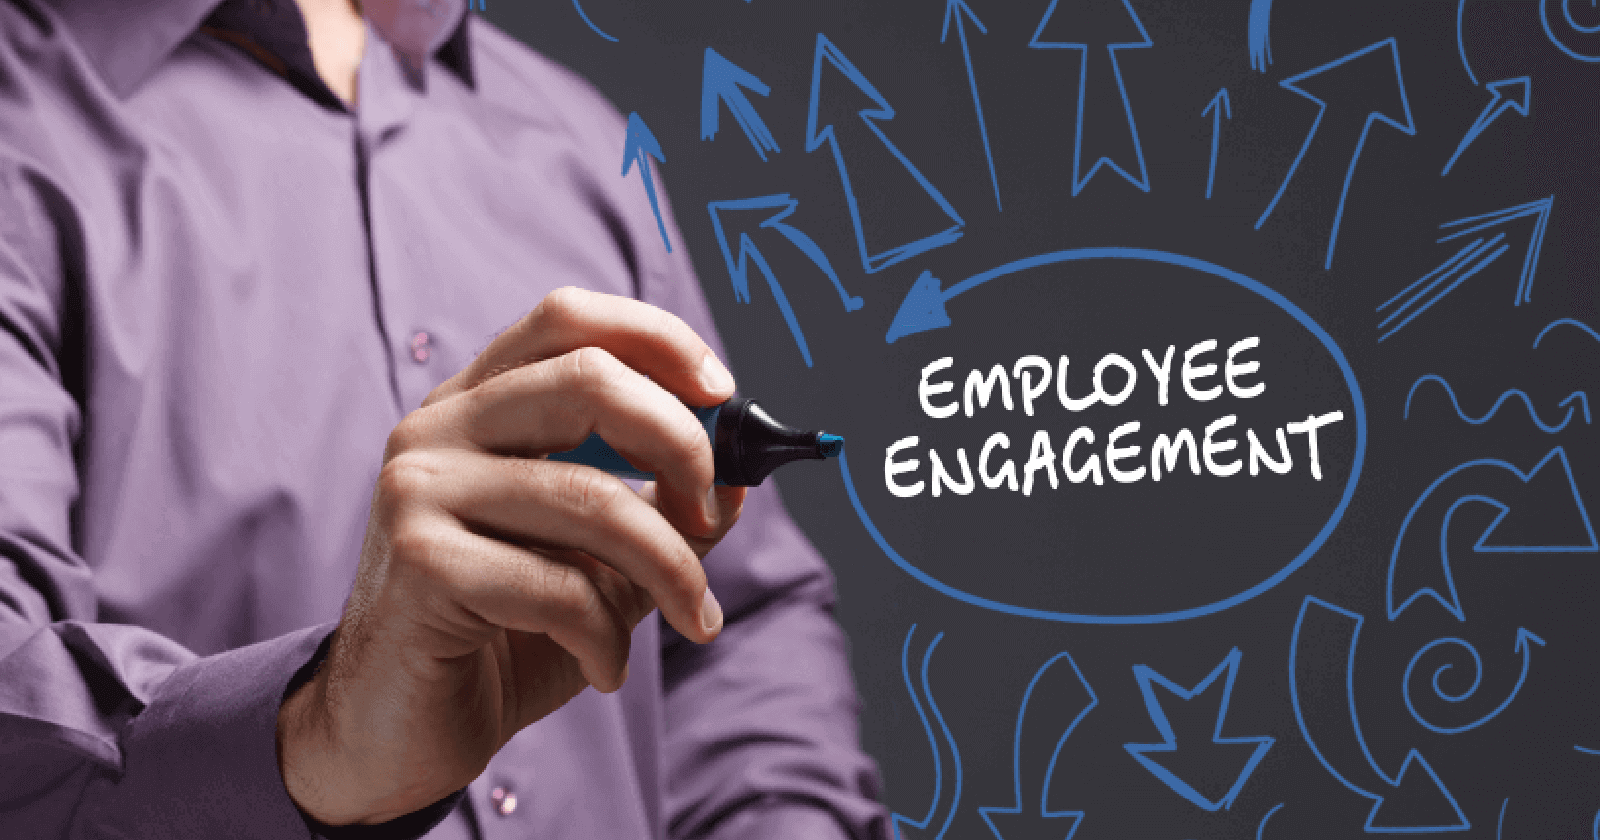 Employee Engagement: Meaning, strategies and examples